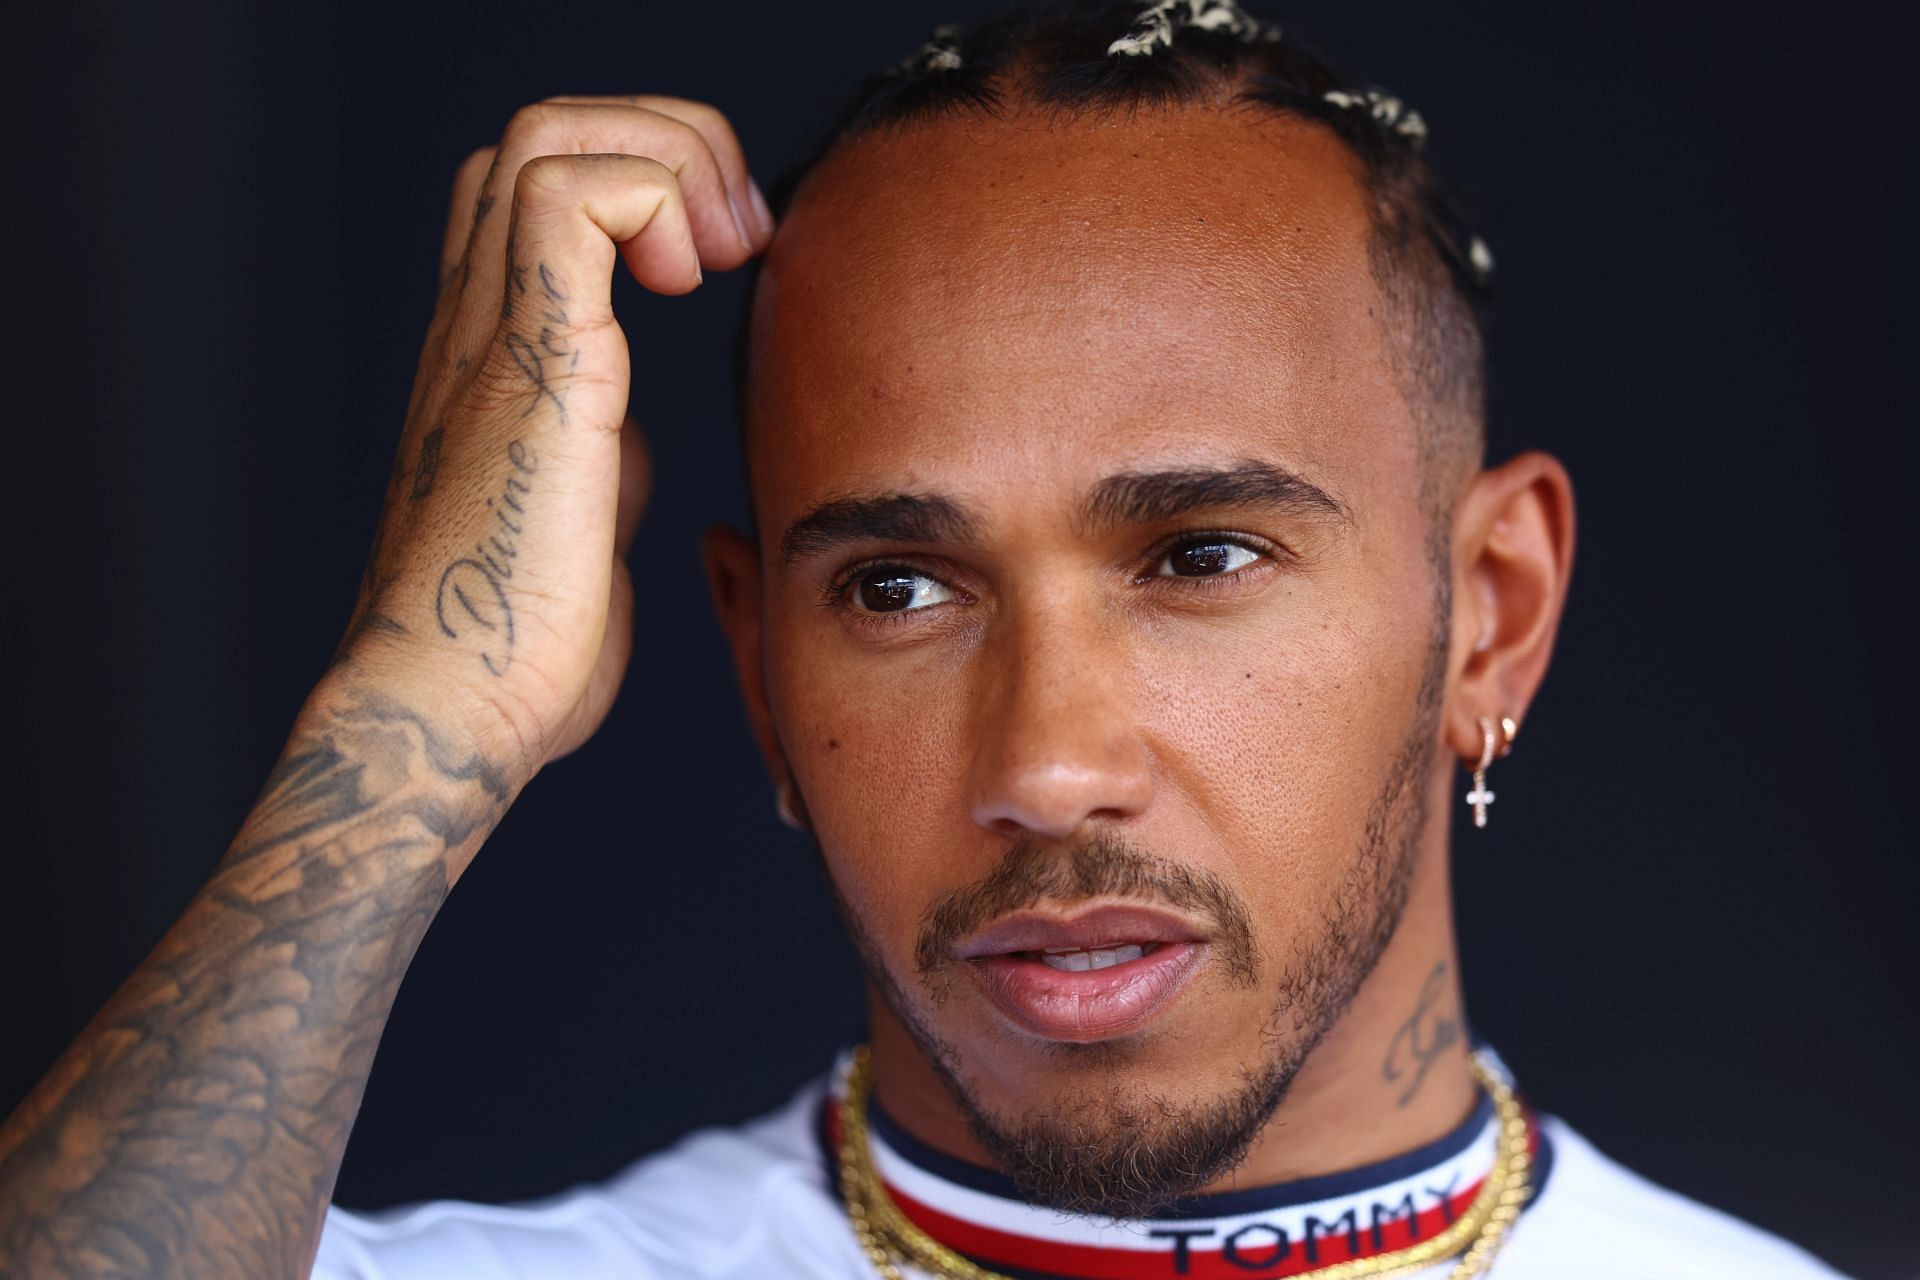 Lewis Hamilton during previews ahead of the F1 Grand Prix of Hungary at Hungaroring on July 28, 2022, in Budapest, Hungary. (Photo by Francois Nel/Getty Images)